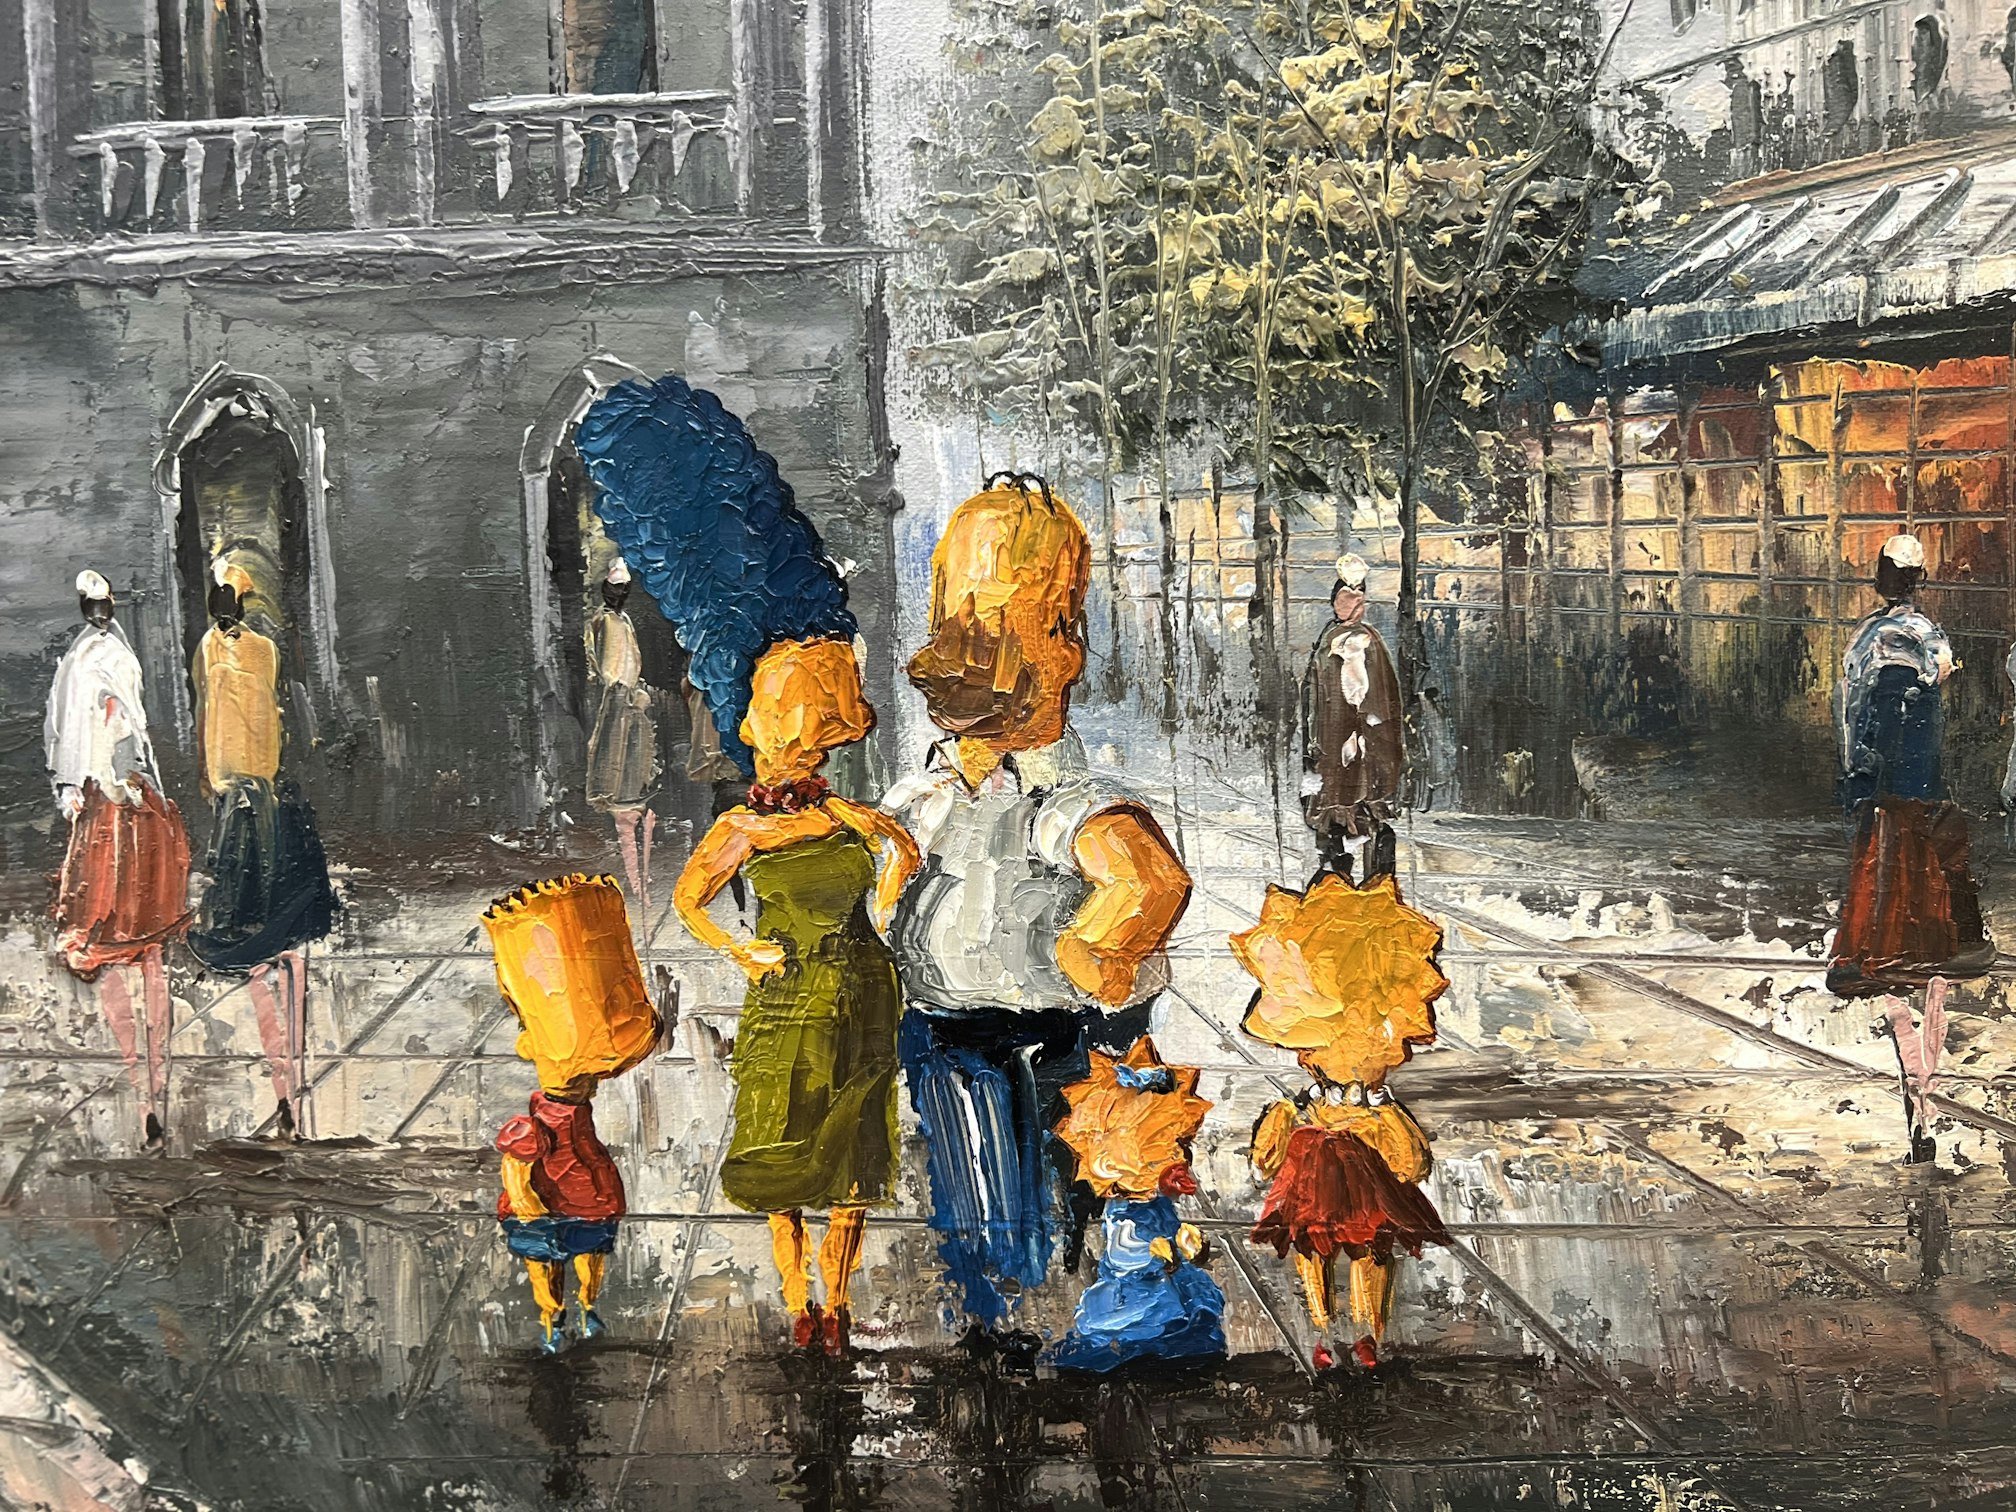 Impressionistic simpsons family in street scene zoomed in